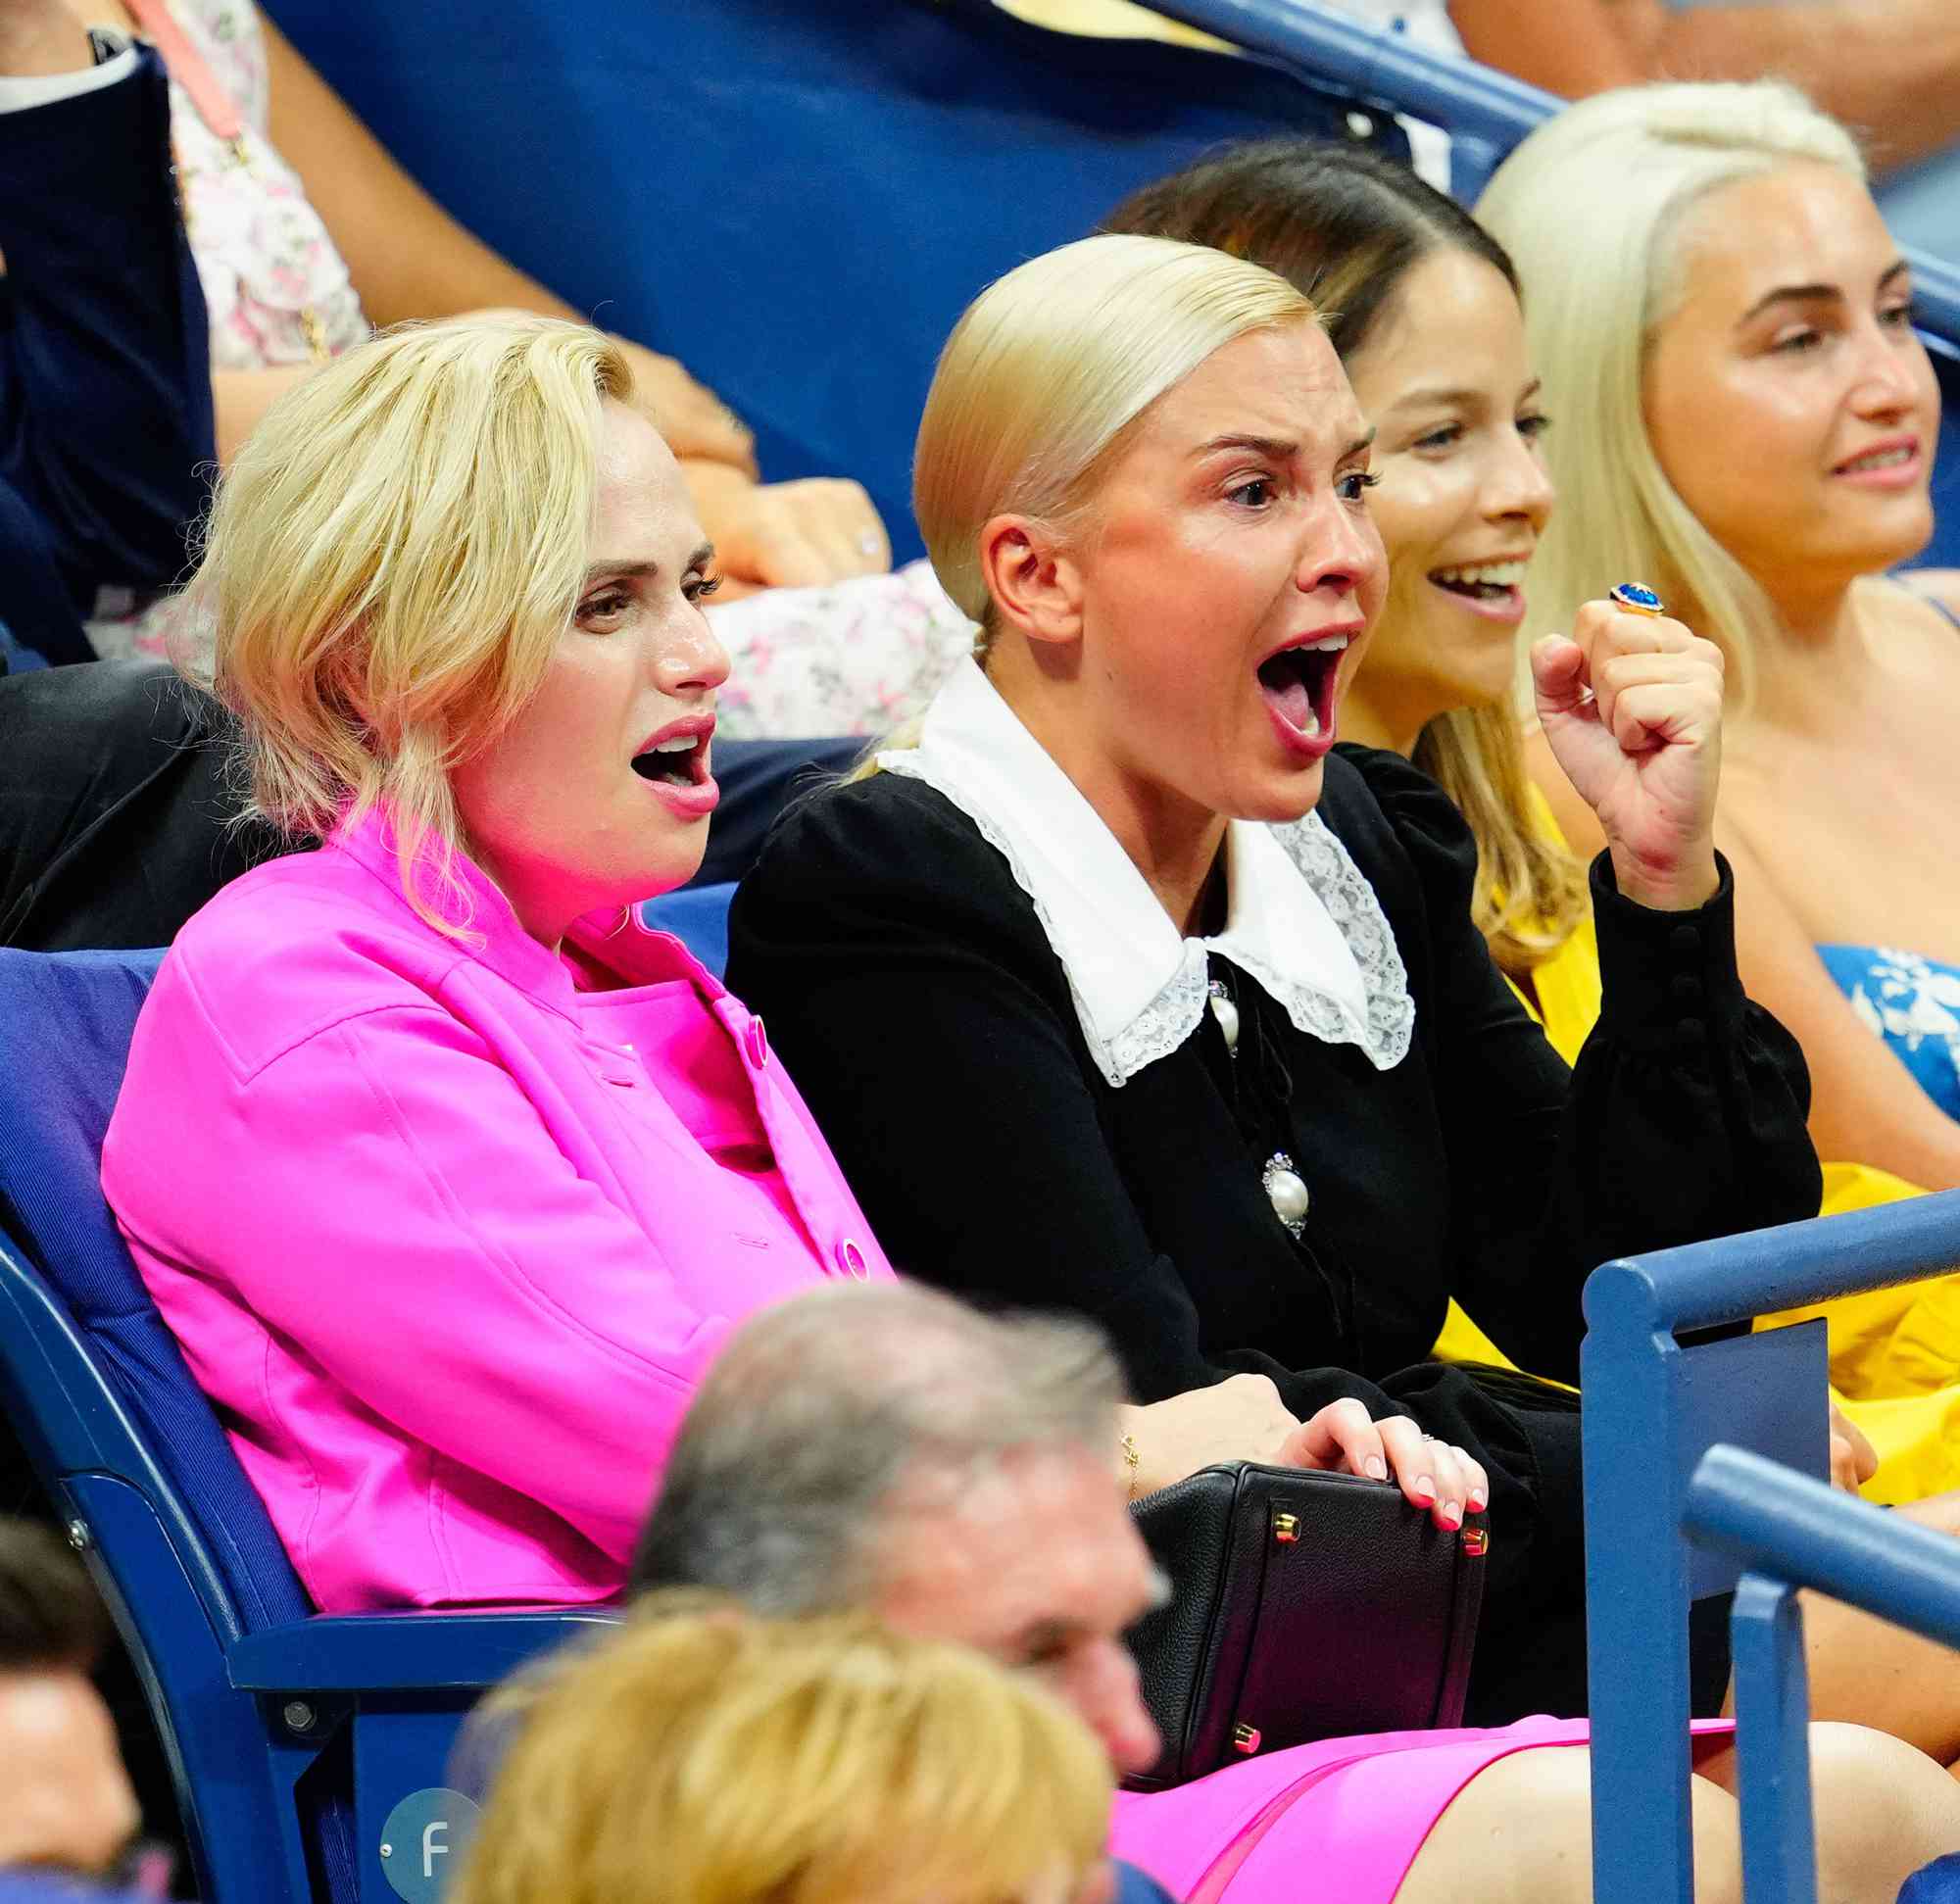 Rebel Wilson and Ramona Agruma attend the Women's Singles First Round match between Serena Williams of the United States and Danka Kovinic of Montenegro on Day One of the 2022 US Open at USTA Billie Jean King National Tennis Center on August 29, 2022 in the Flushing neighborhood of the Queens borough of New York City.